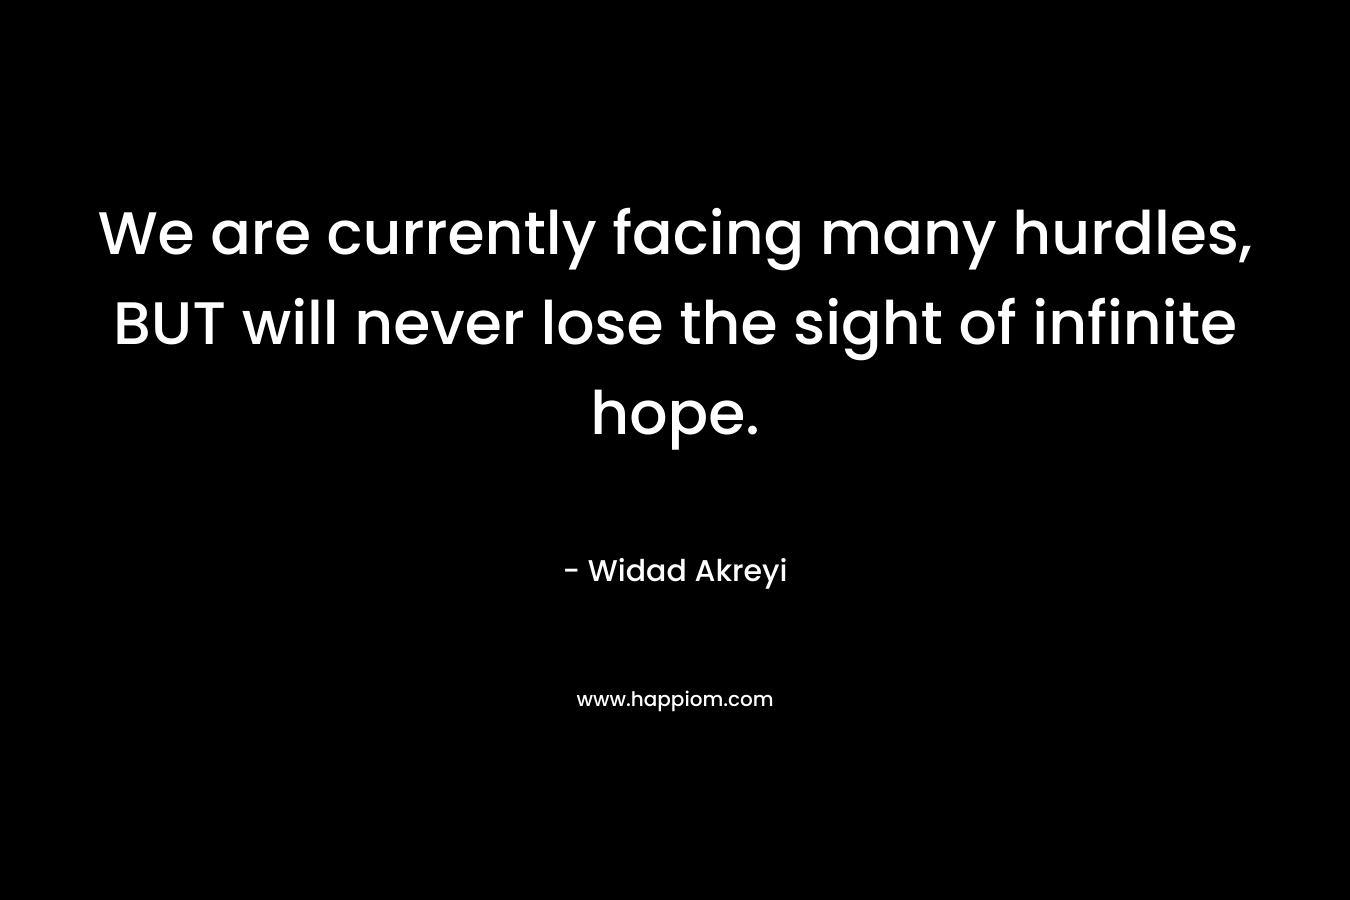 We are currently facing many hurdles, BUT will never lose the sight of infinite hope.